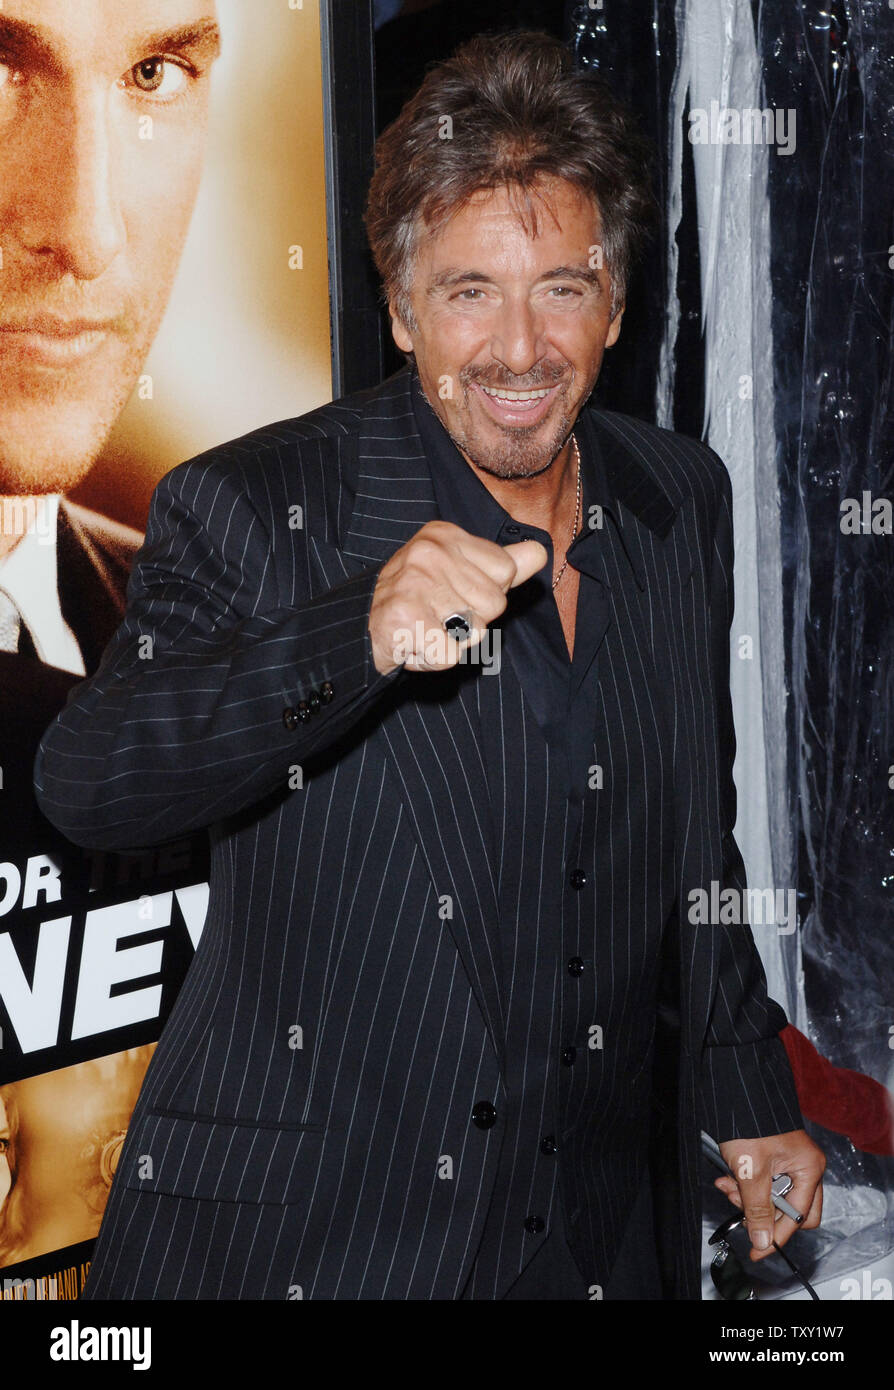 Actor Al Pacino, one of the stars of the new motion picture 'Two for the Money', arrives for the film's premiere in Beverly Hills September 26, 2005. The film also stars Matthew McConaughey, Rene Russo and Jaime King and is about a former college football star who suffers a career-ending injury and aligns himself with one of the most renowned bookies in the sports gambling business. The movie opens October 7 in the United States.    (UPI Photo/Jim Ruymen) Stock Photo